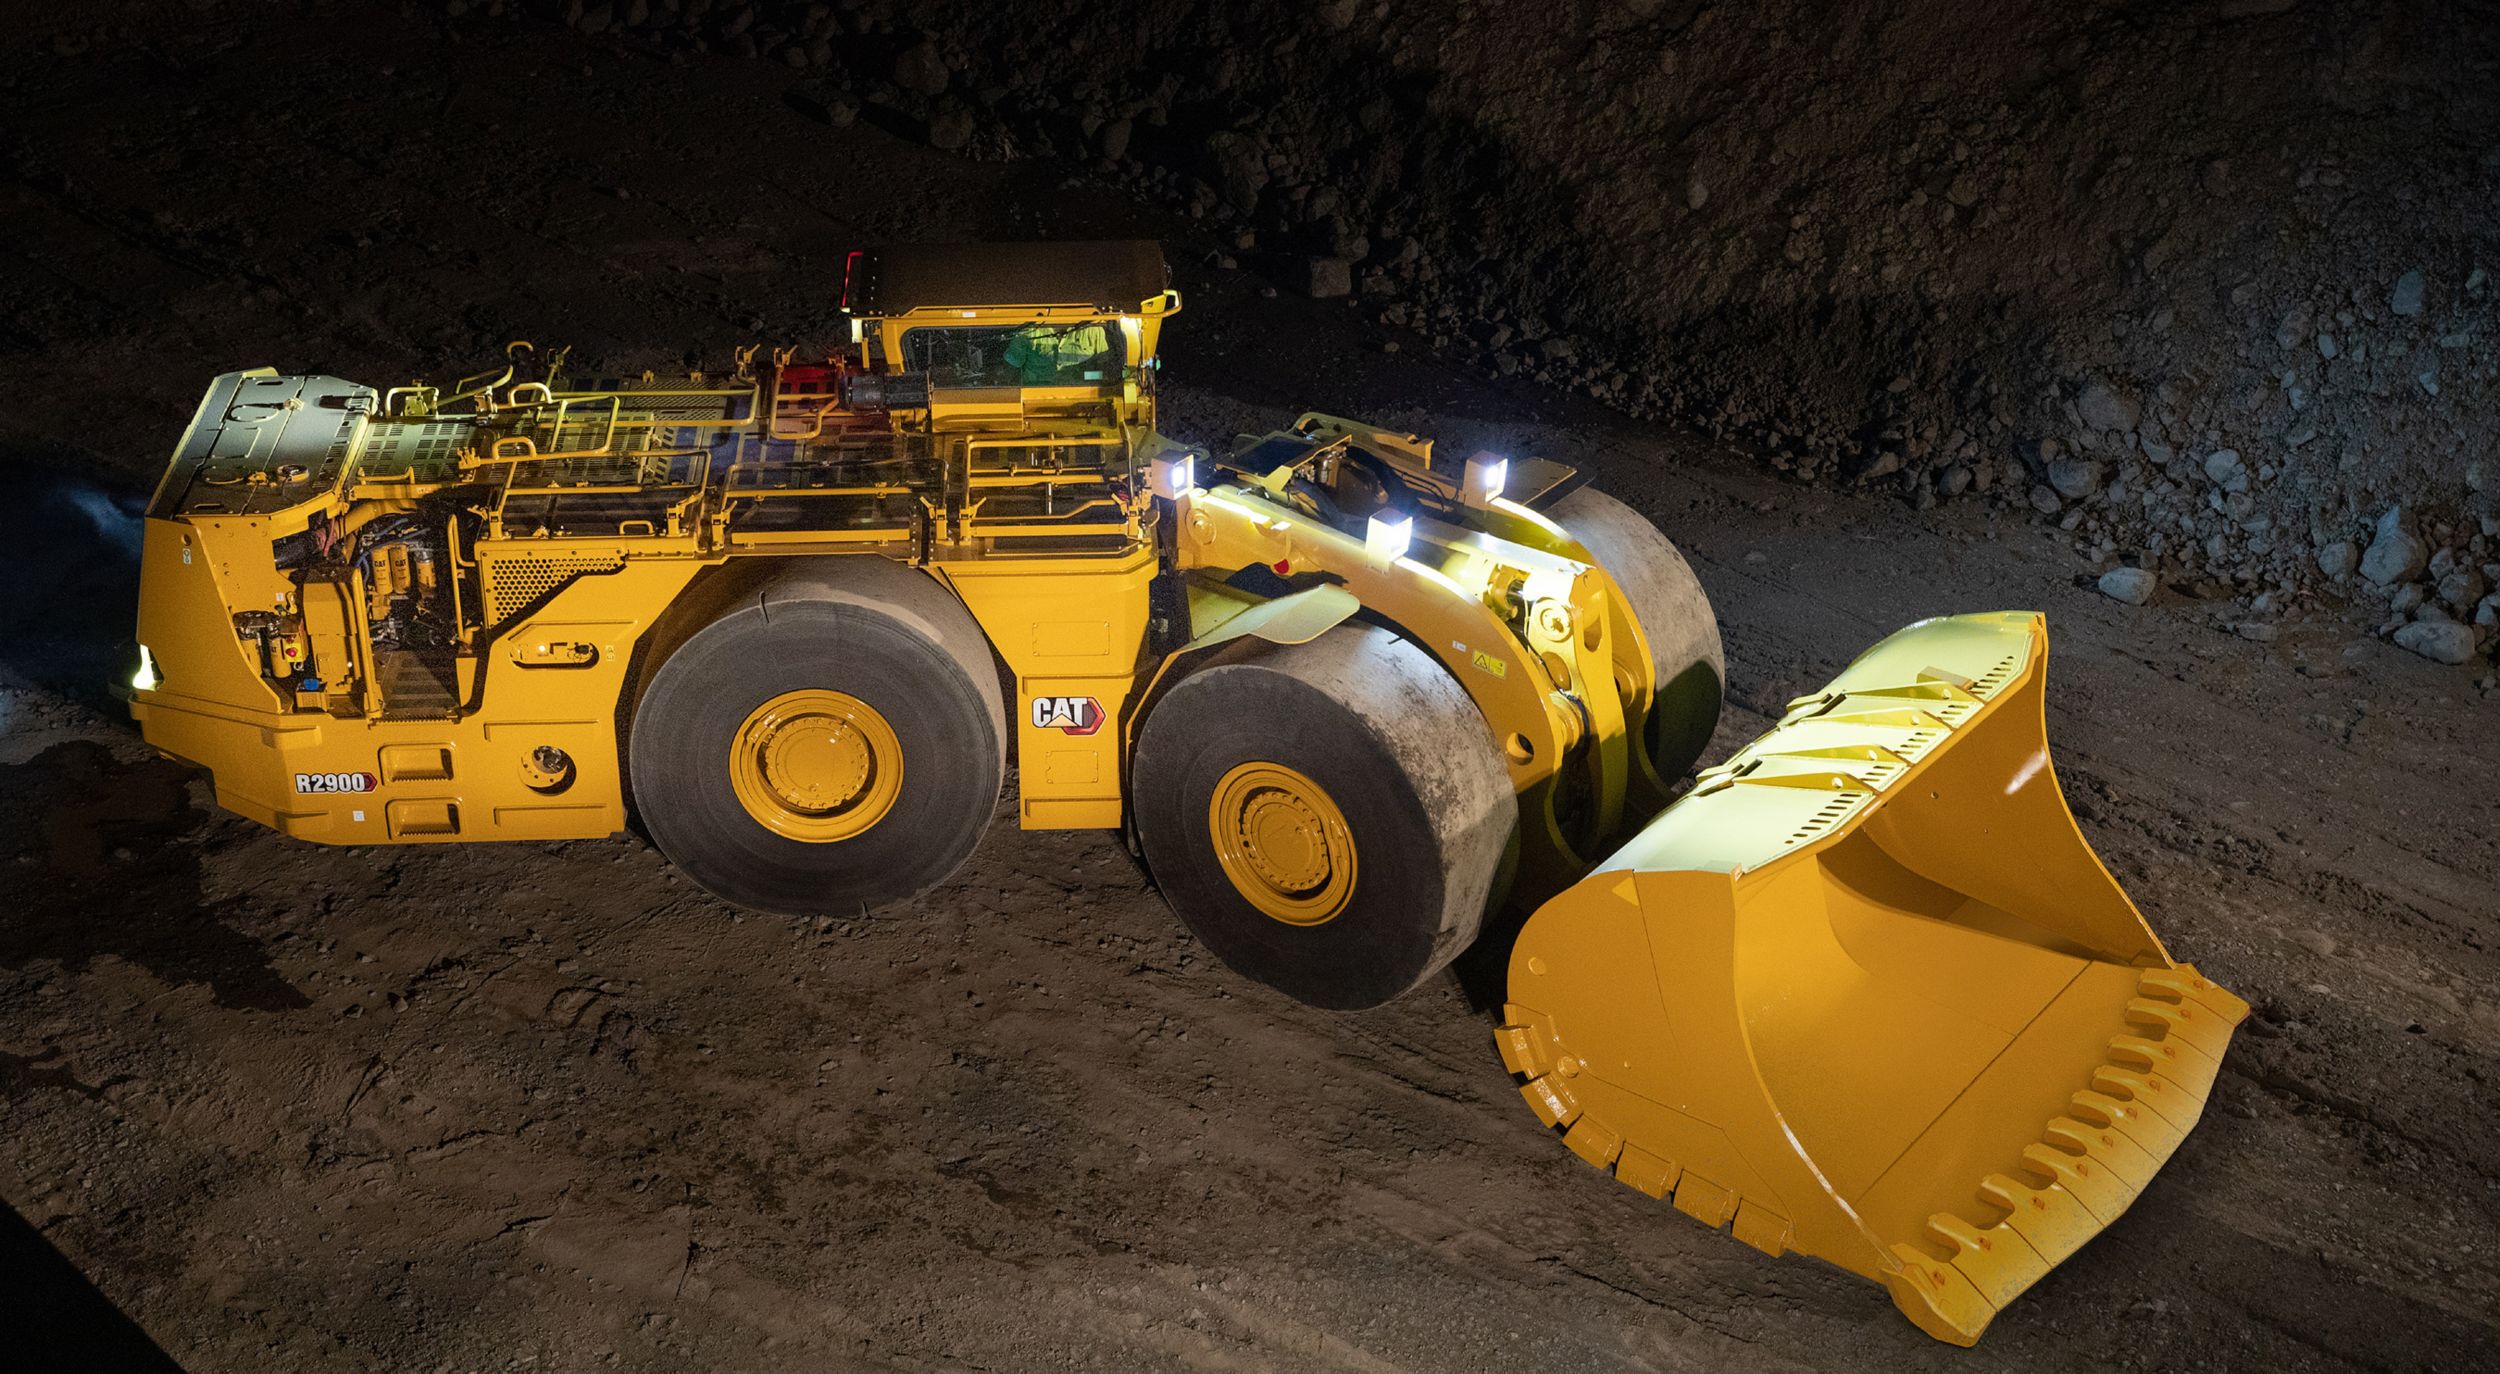 Cat R2900 Underground Loader, photographed from above